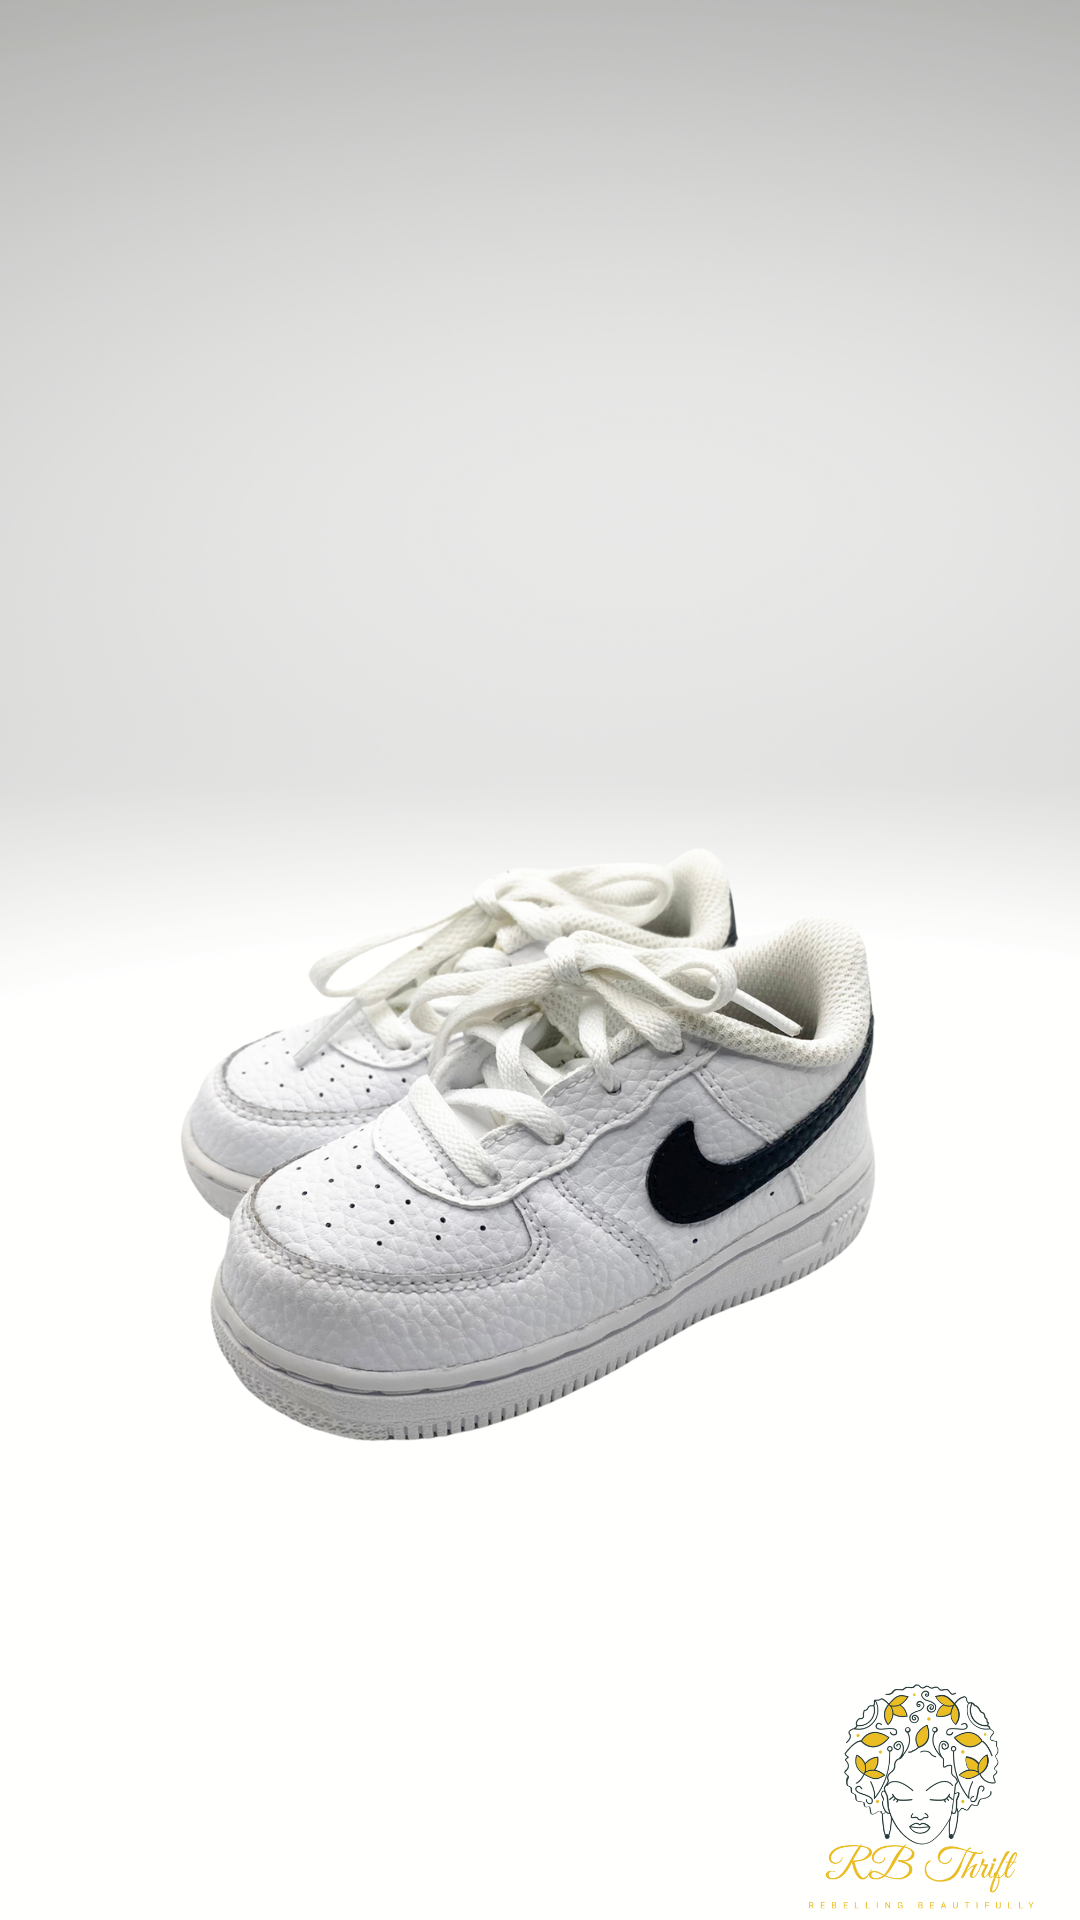 size 7c air force 1